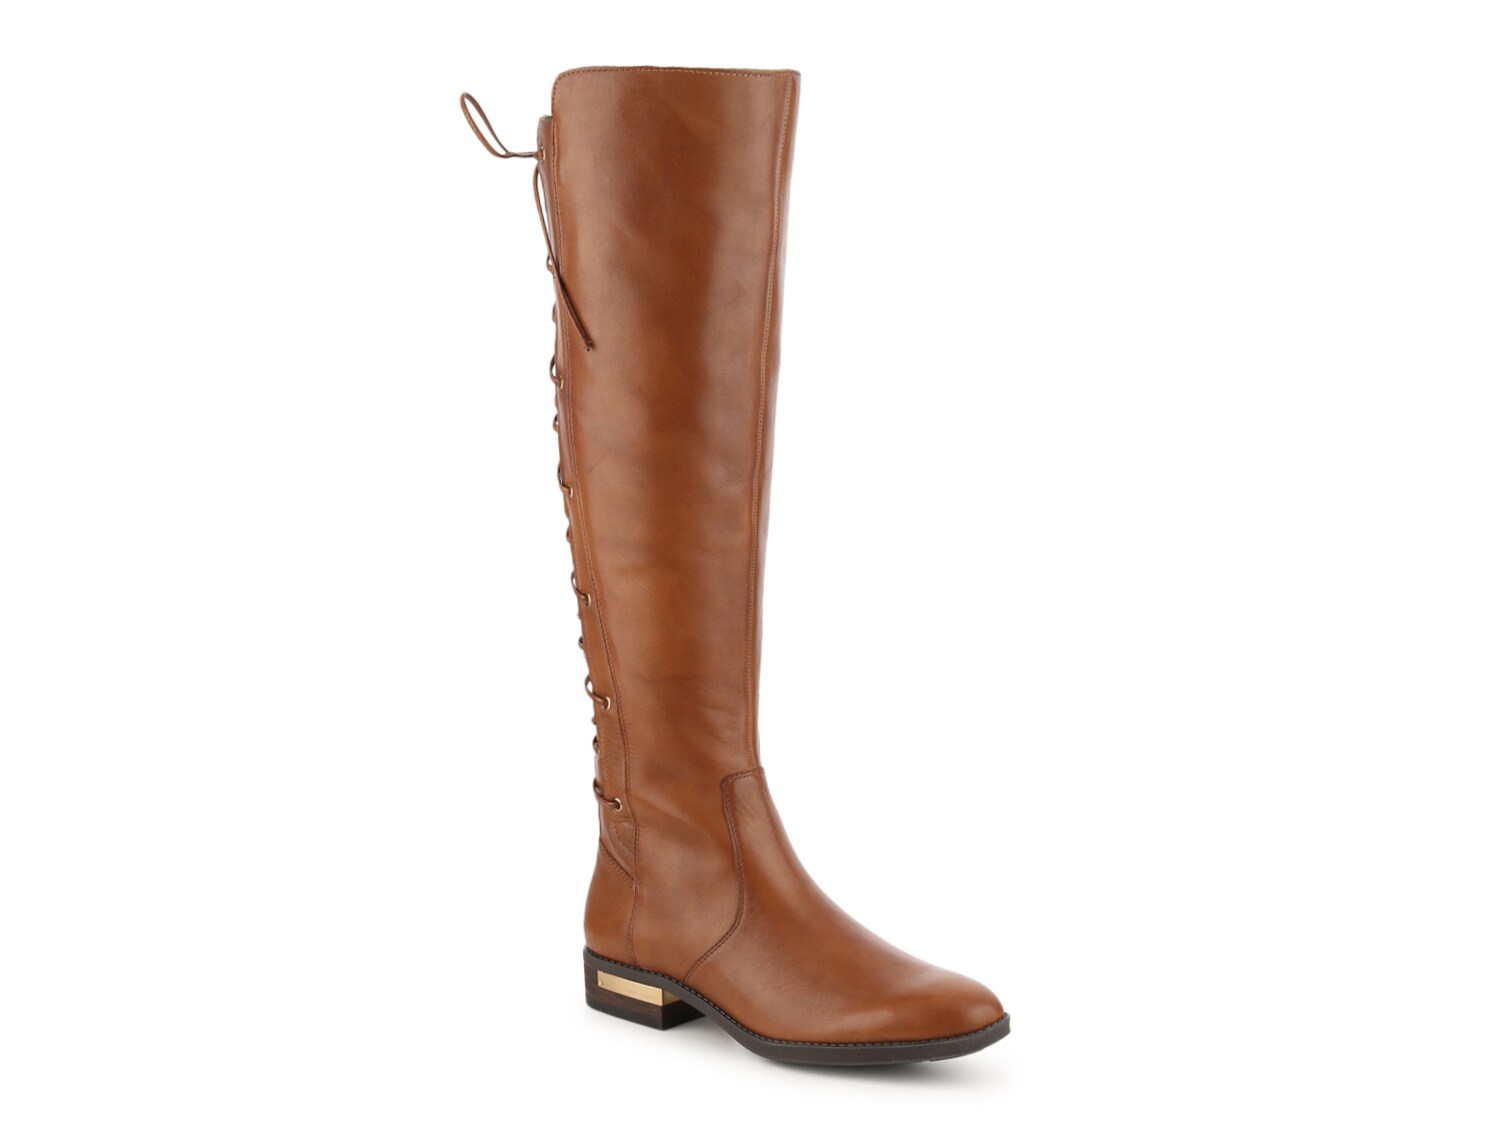 Vince Camuto Palenda Over-the-Knee Boot - Free Shipping | DSW